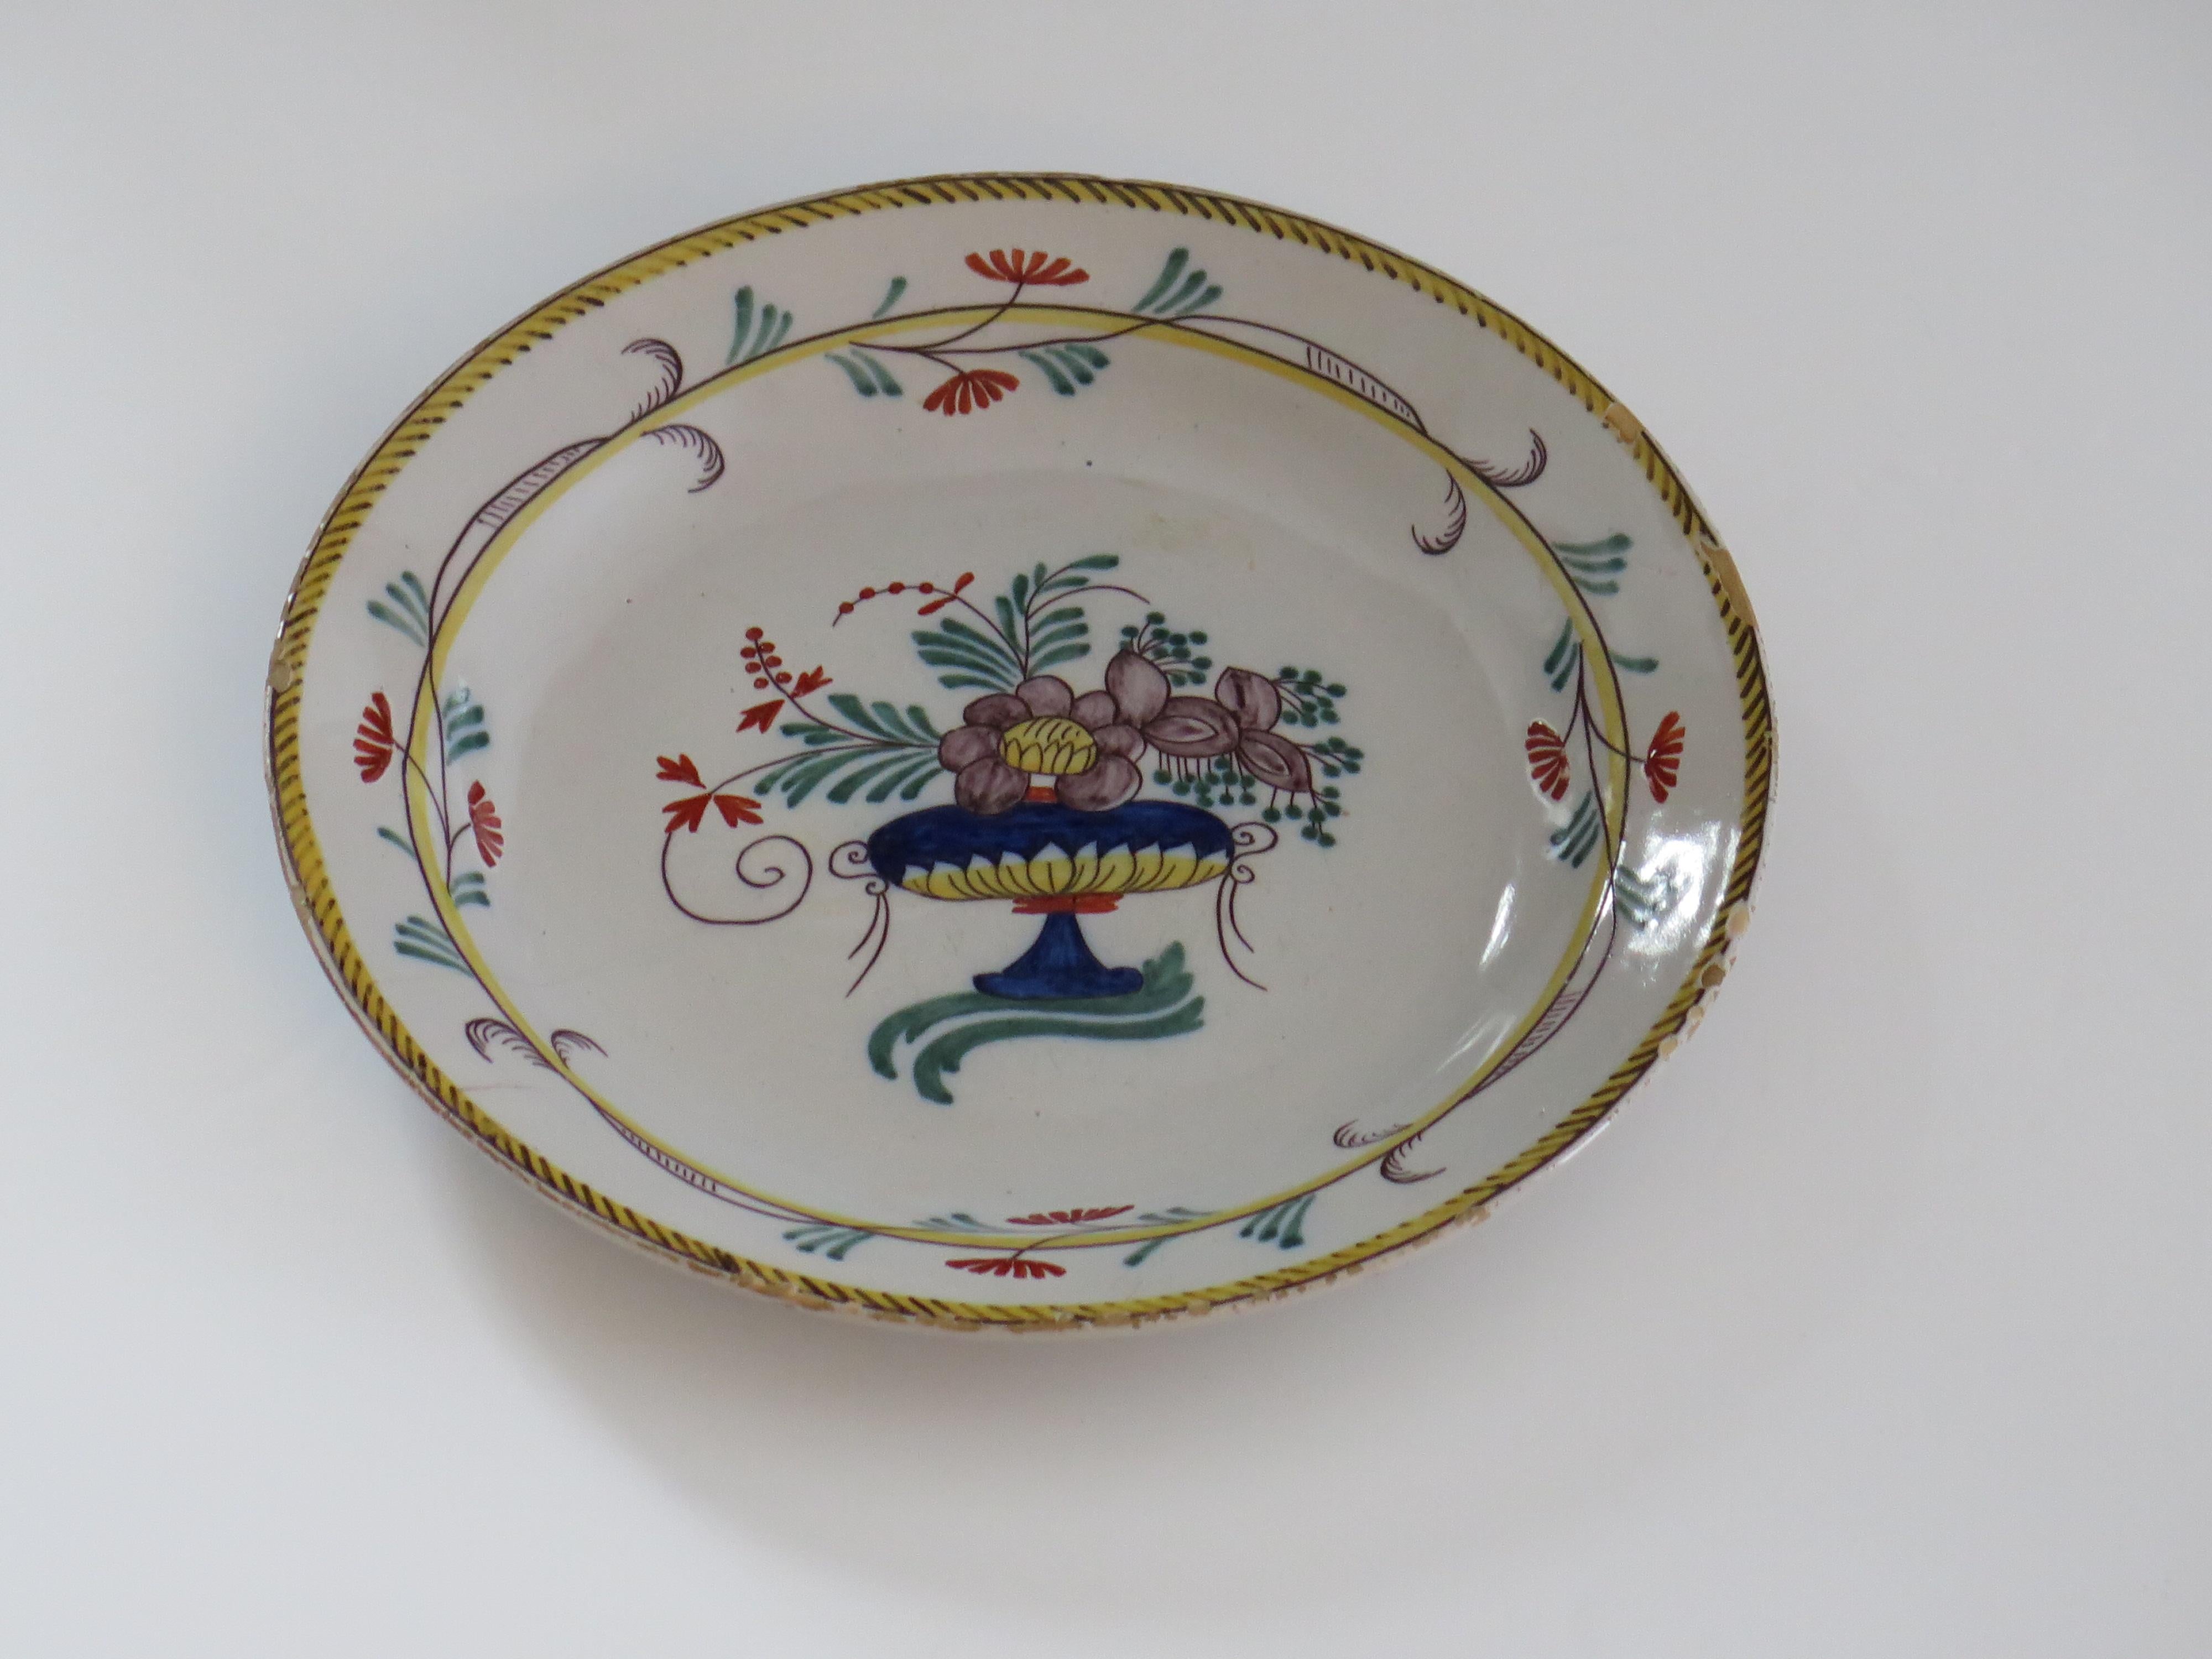 French Provincial 18th Century Faience Earthenware Plate (C) hand painted, French circa 1780 For Sale